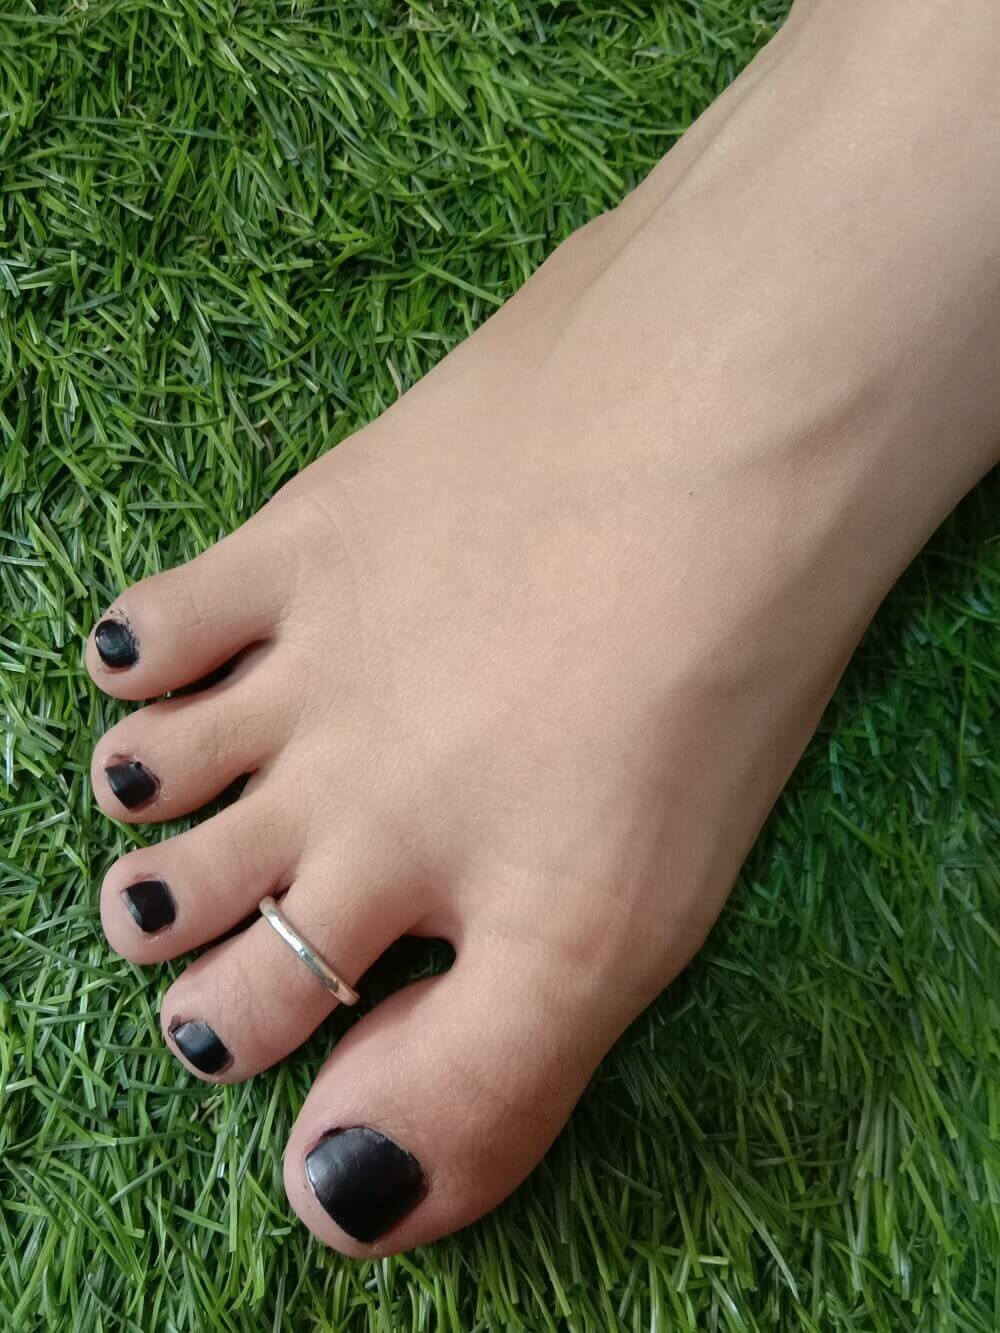 Simple Toe Rings for women India - Silver Toe Rings by